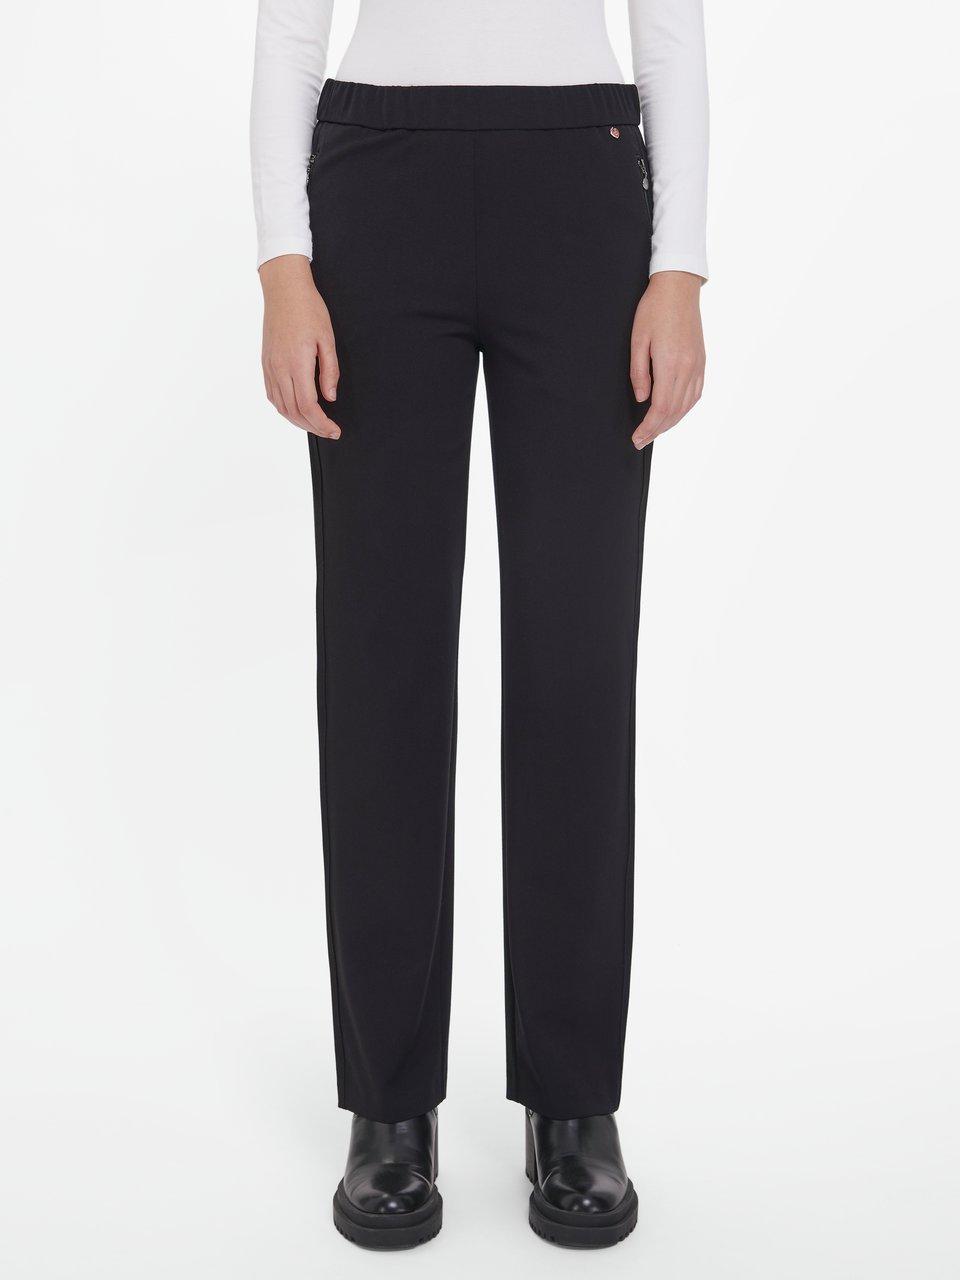 Relaxed by Toni - Broek 'Scarlet Trend Straight'